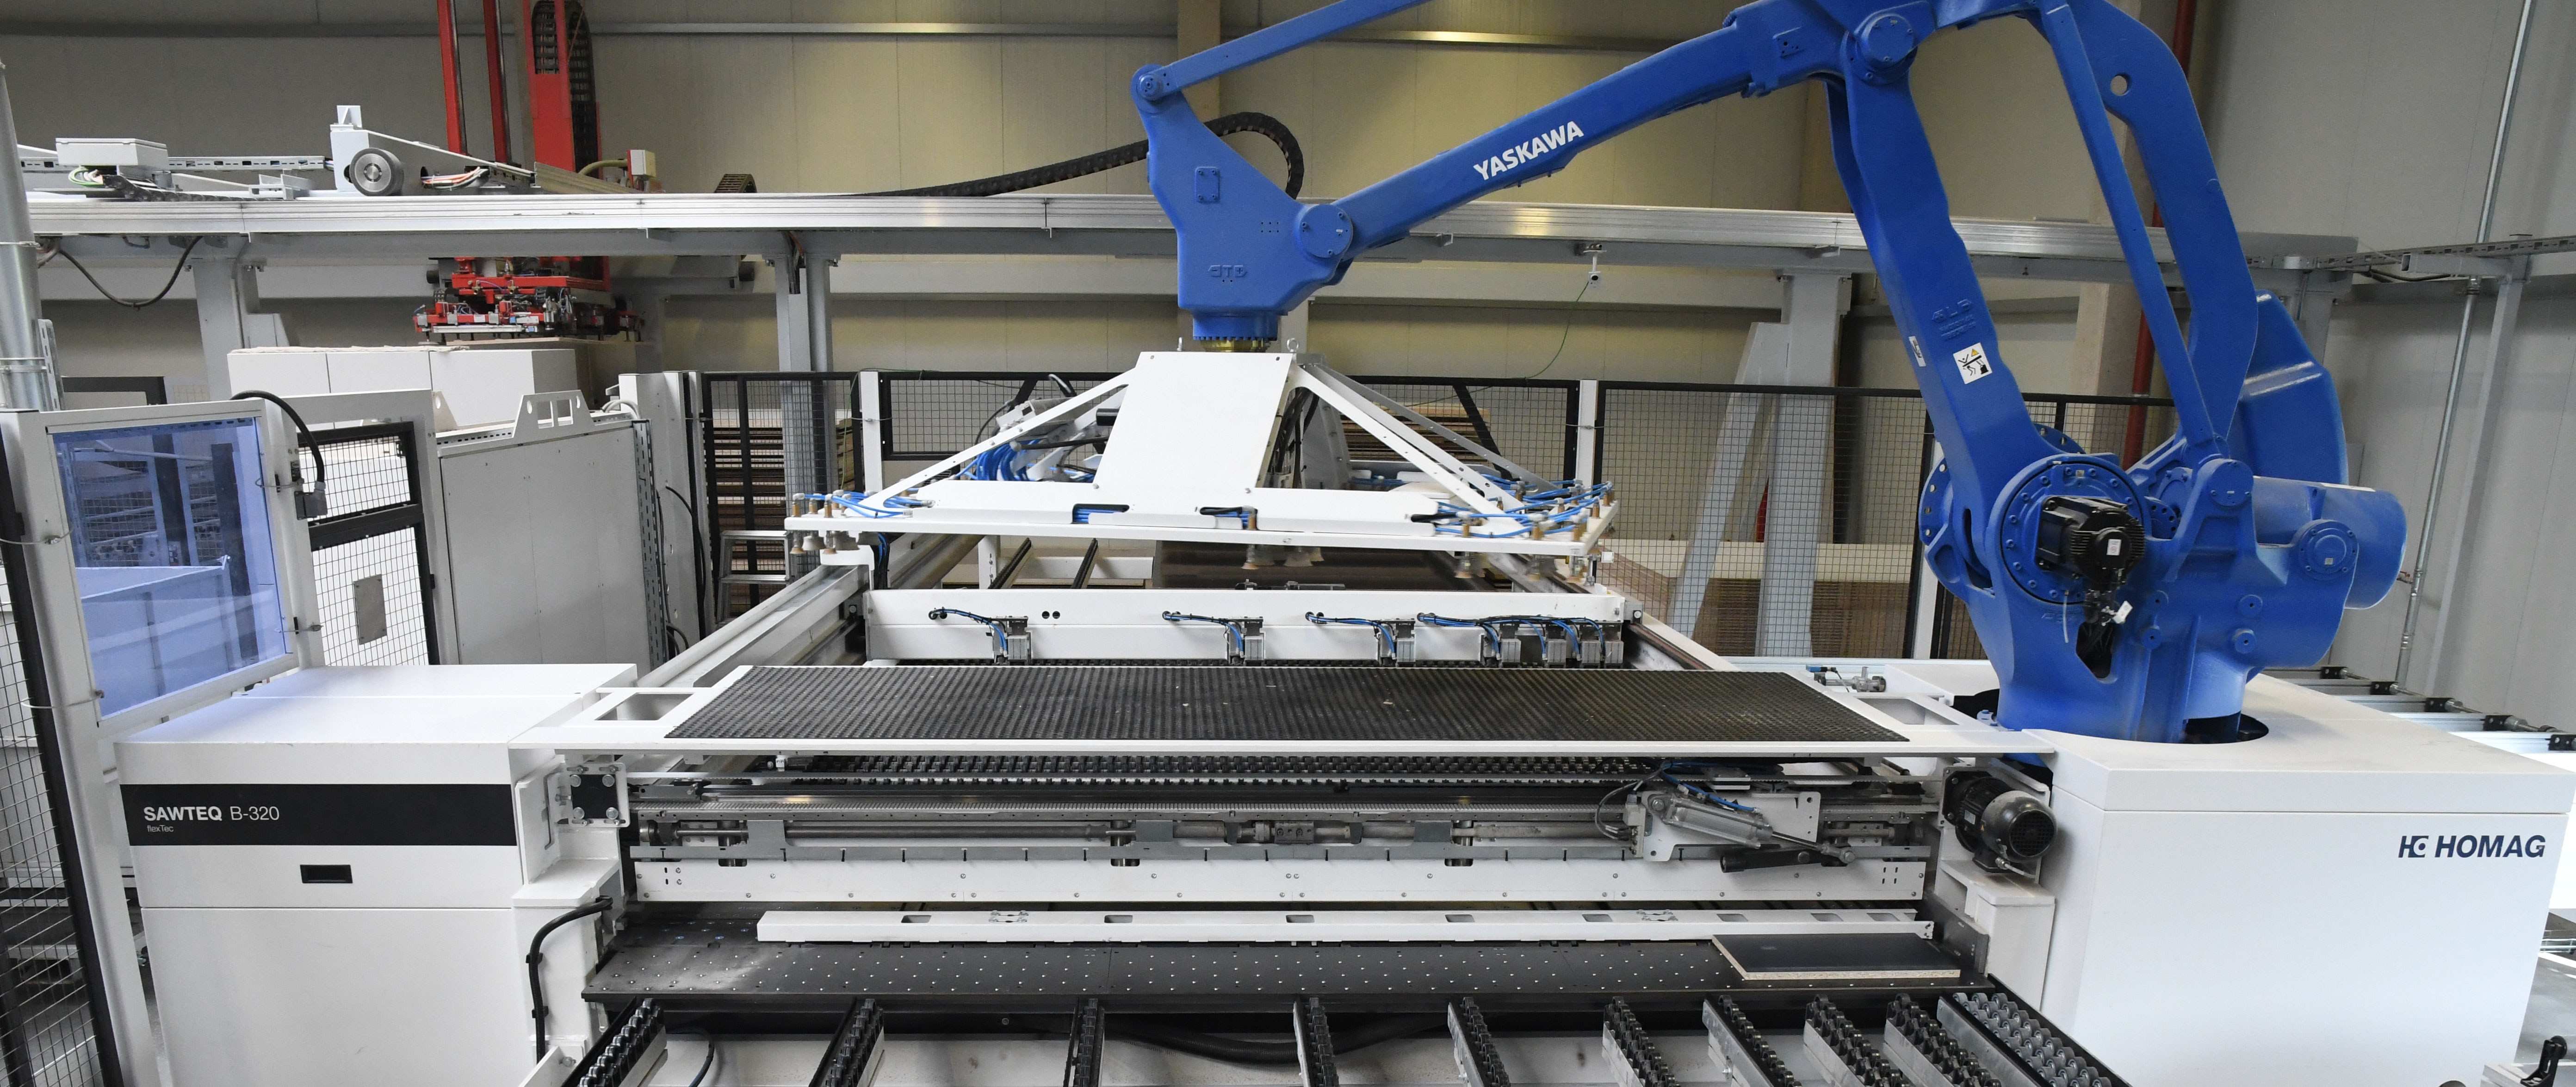 Almost 100% of cuts in batch size 1 production at Horatec are carried out by two SAWTEQ B-320 flexTec robot saws from HOMAG.